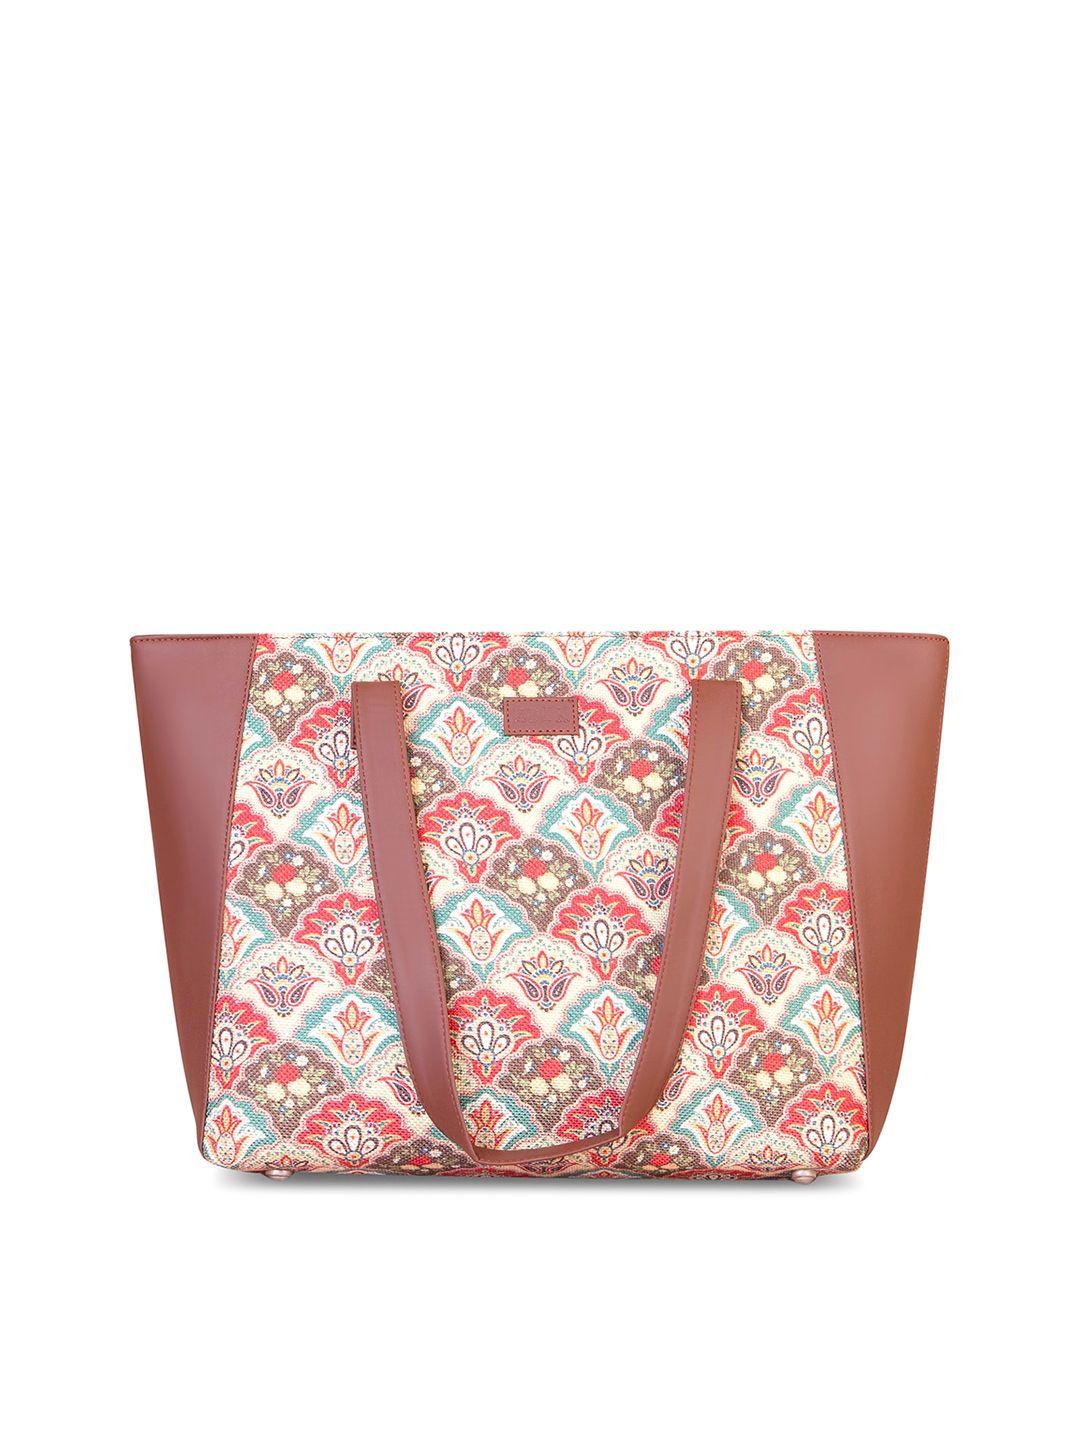 zouk multicoloured ethnic motifs printed structured tote bag